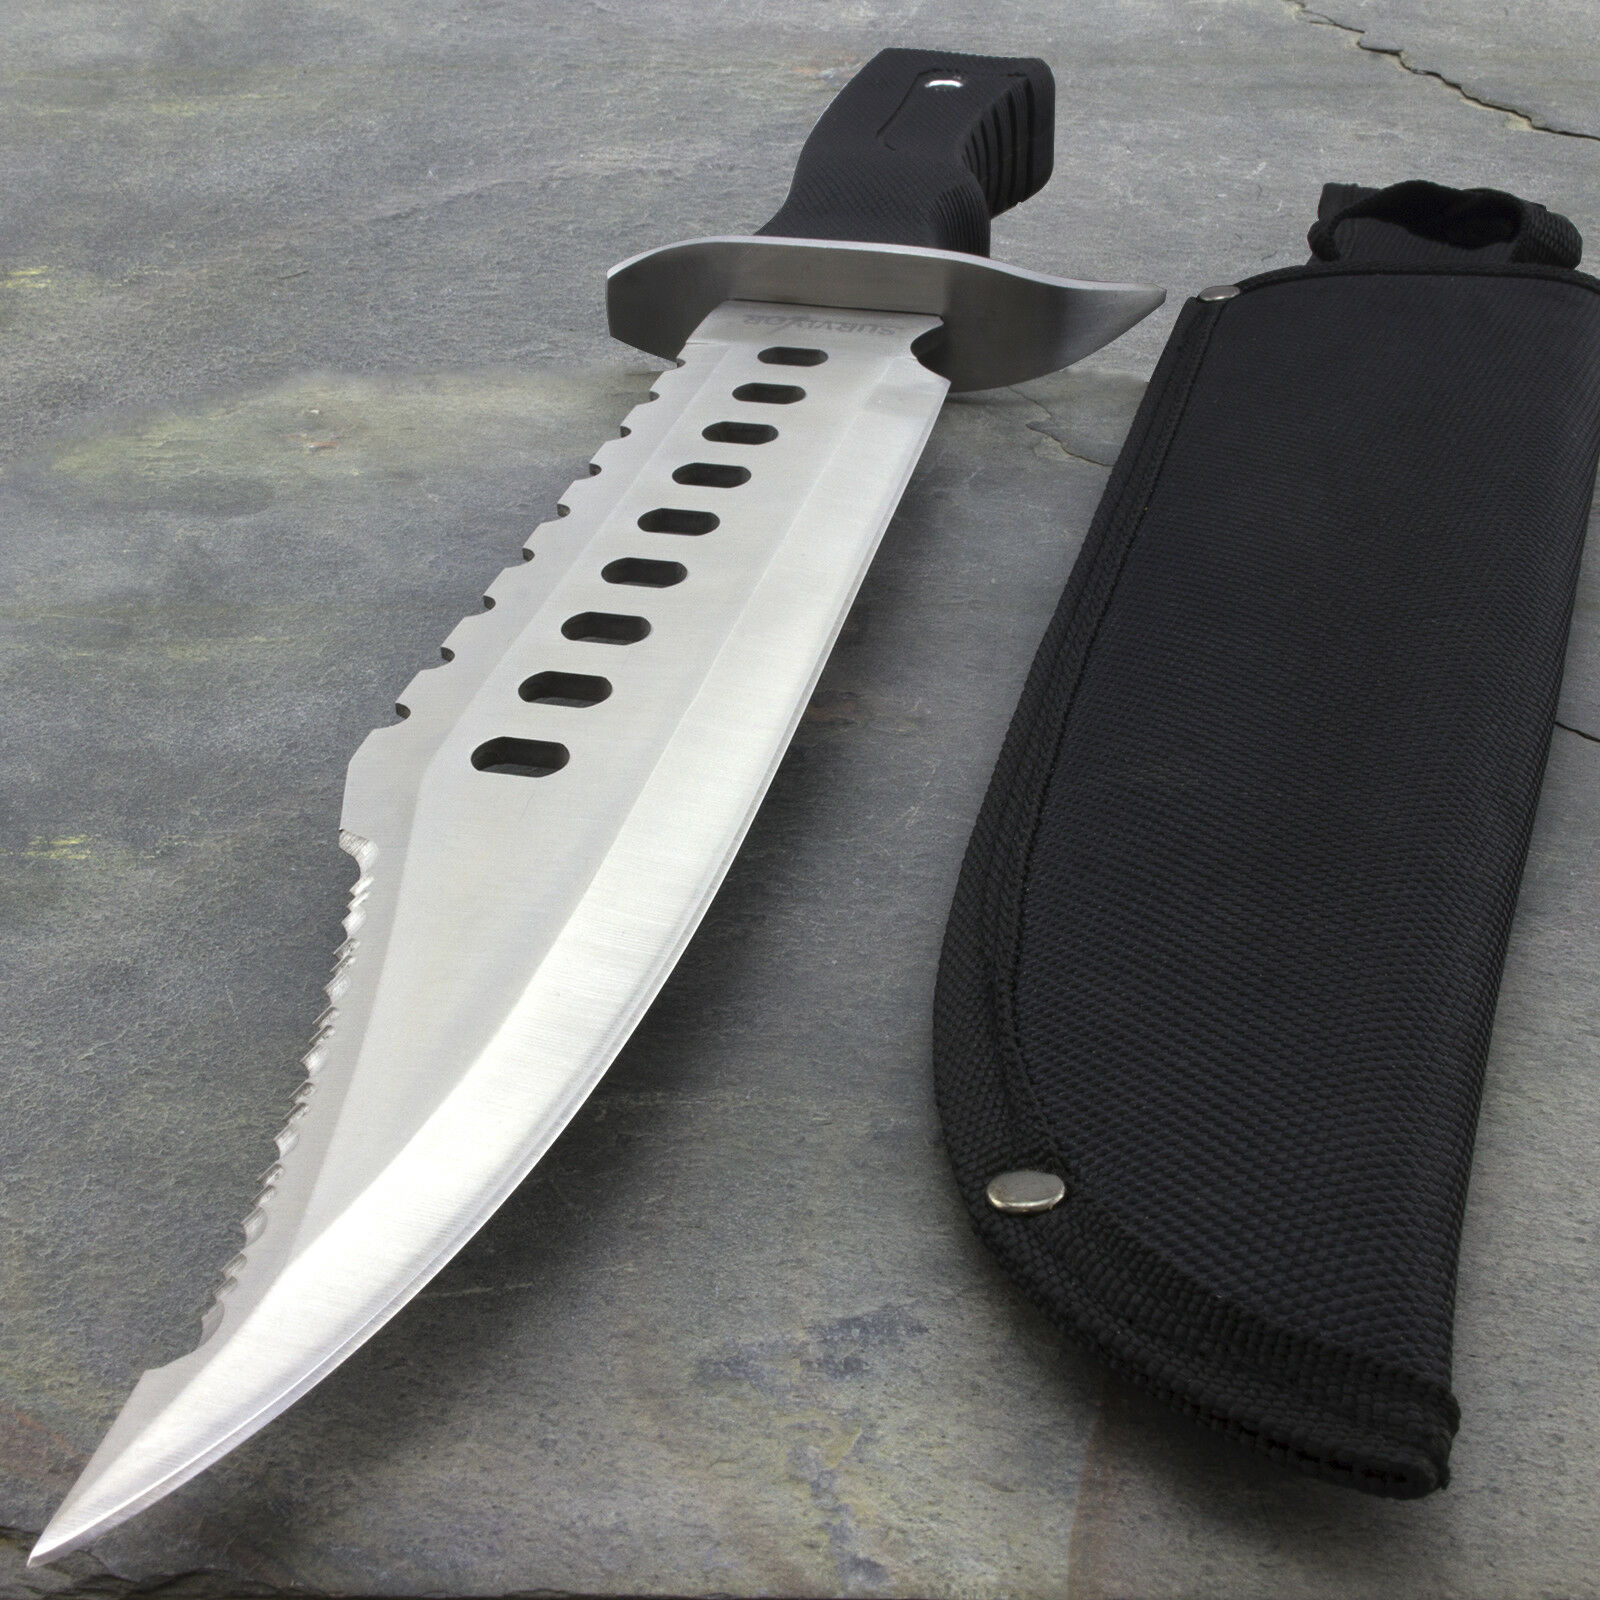 17" Large Survival Bowie Hunting Knife W/ Sheath Military Fixed Blade Combat